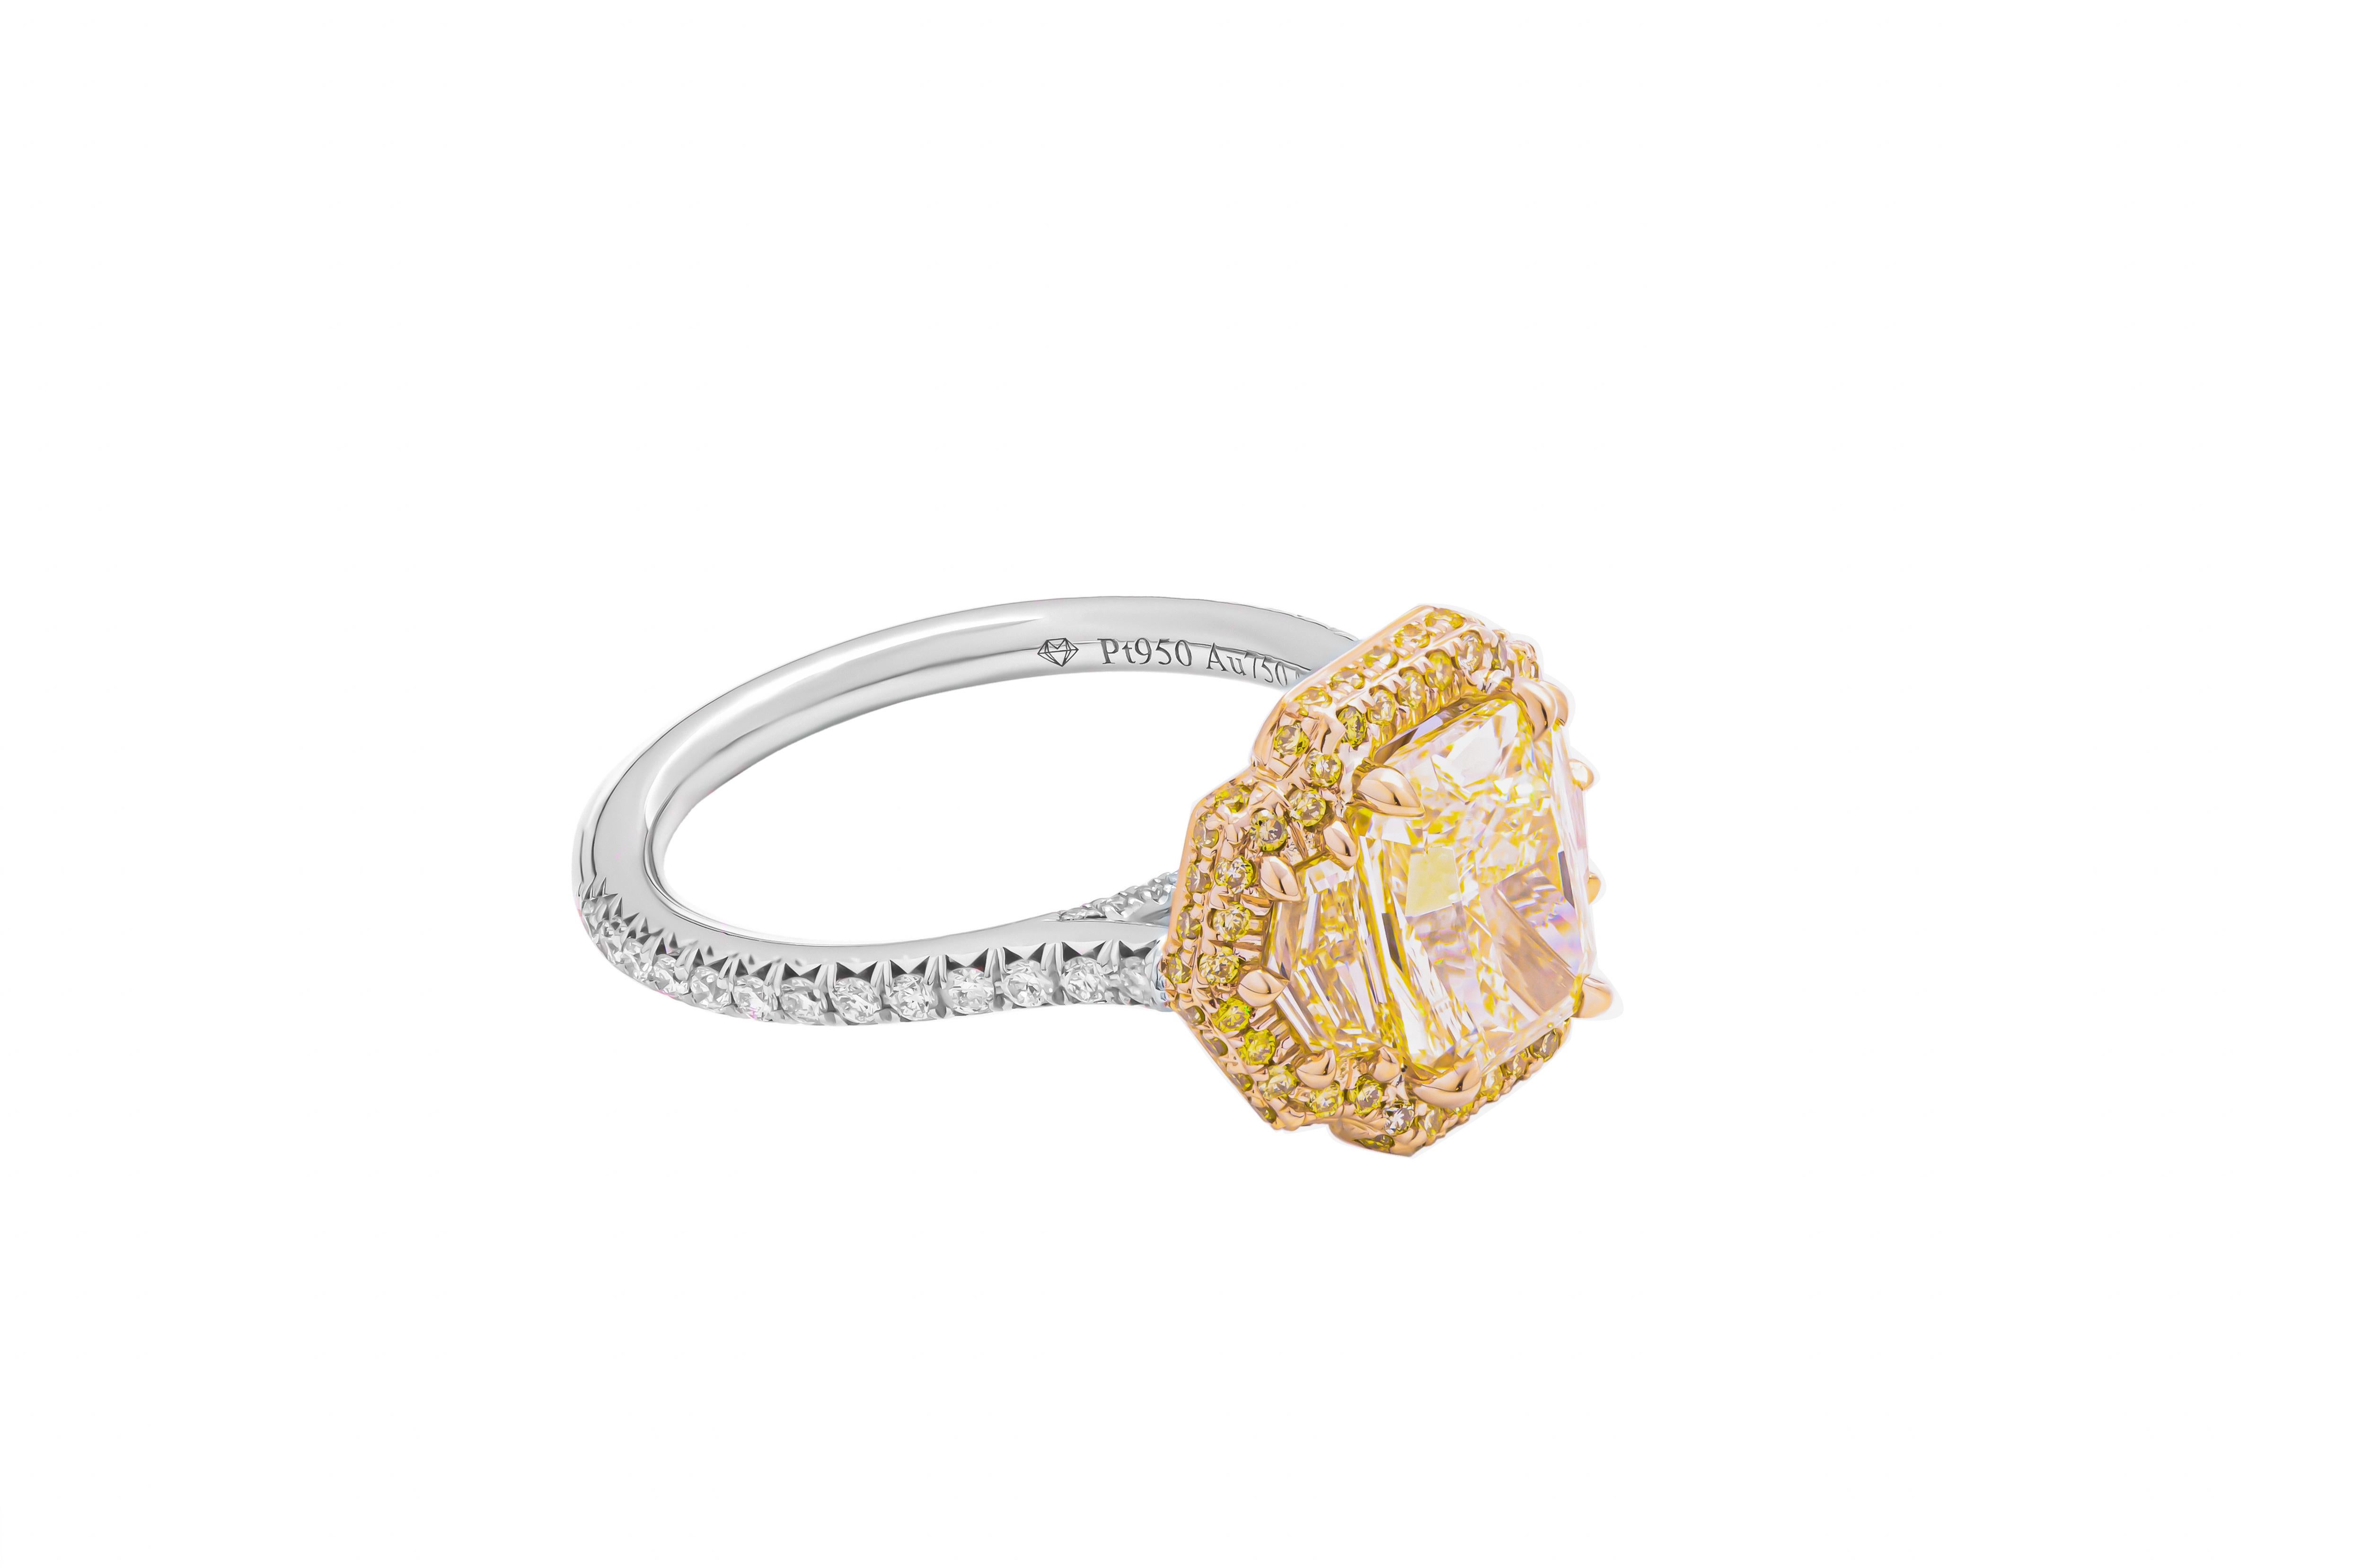 Introducing our exquisite 3 Stone Ring in a captivating blend of Platinum and 18K Yellow Gold, meticulously crafted to showcase timeless elegance. The centerpiece of this resplendent ring is a breathtaking 2.14-carat Fancy Light Yellow VS2 Radiant